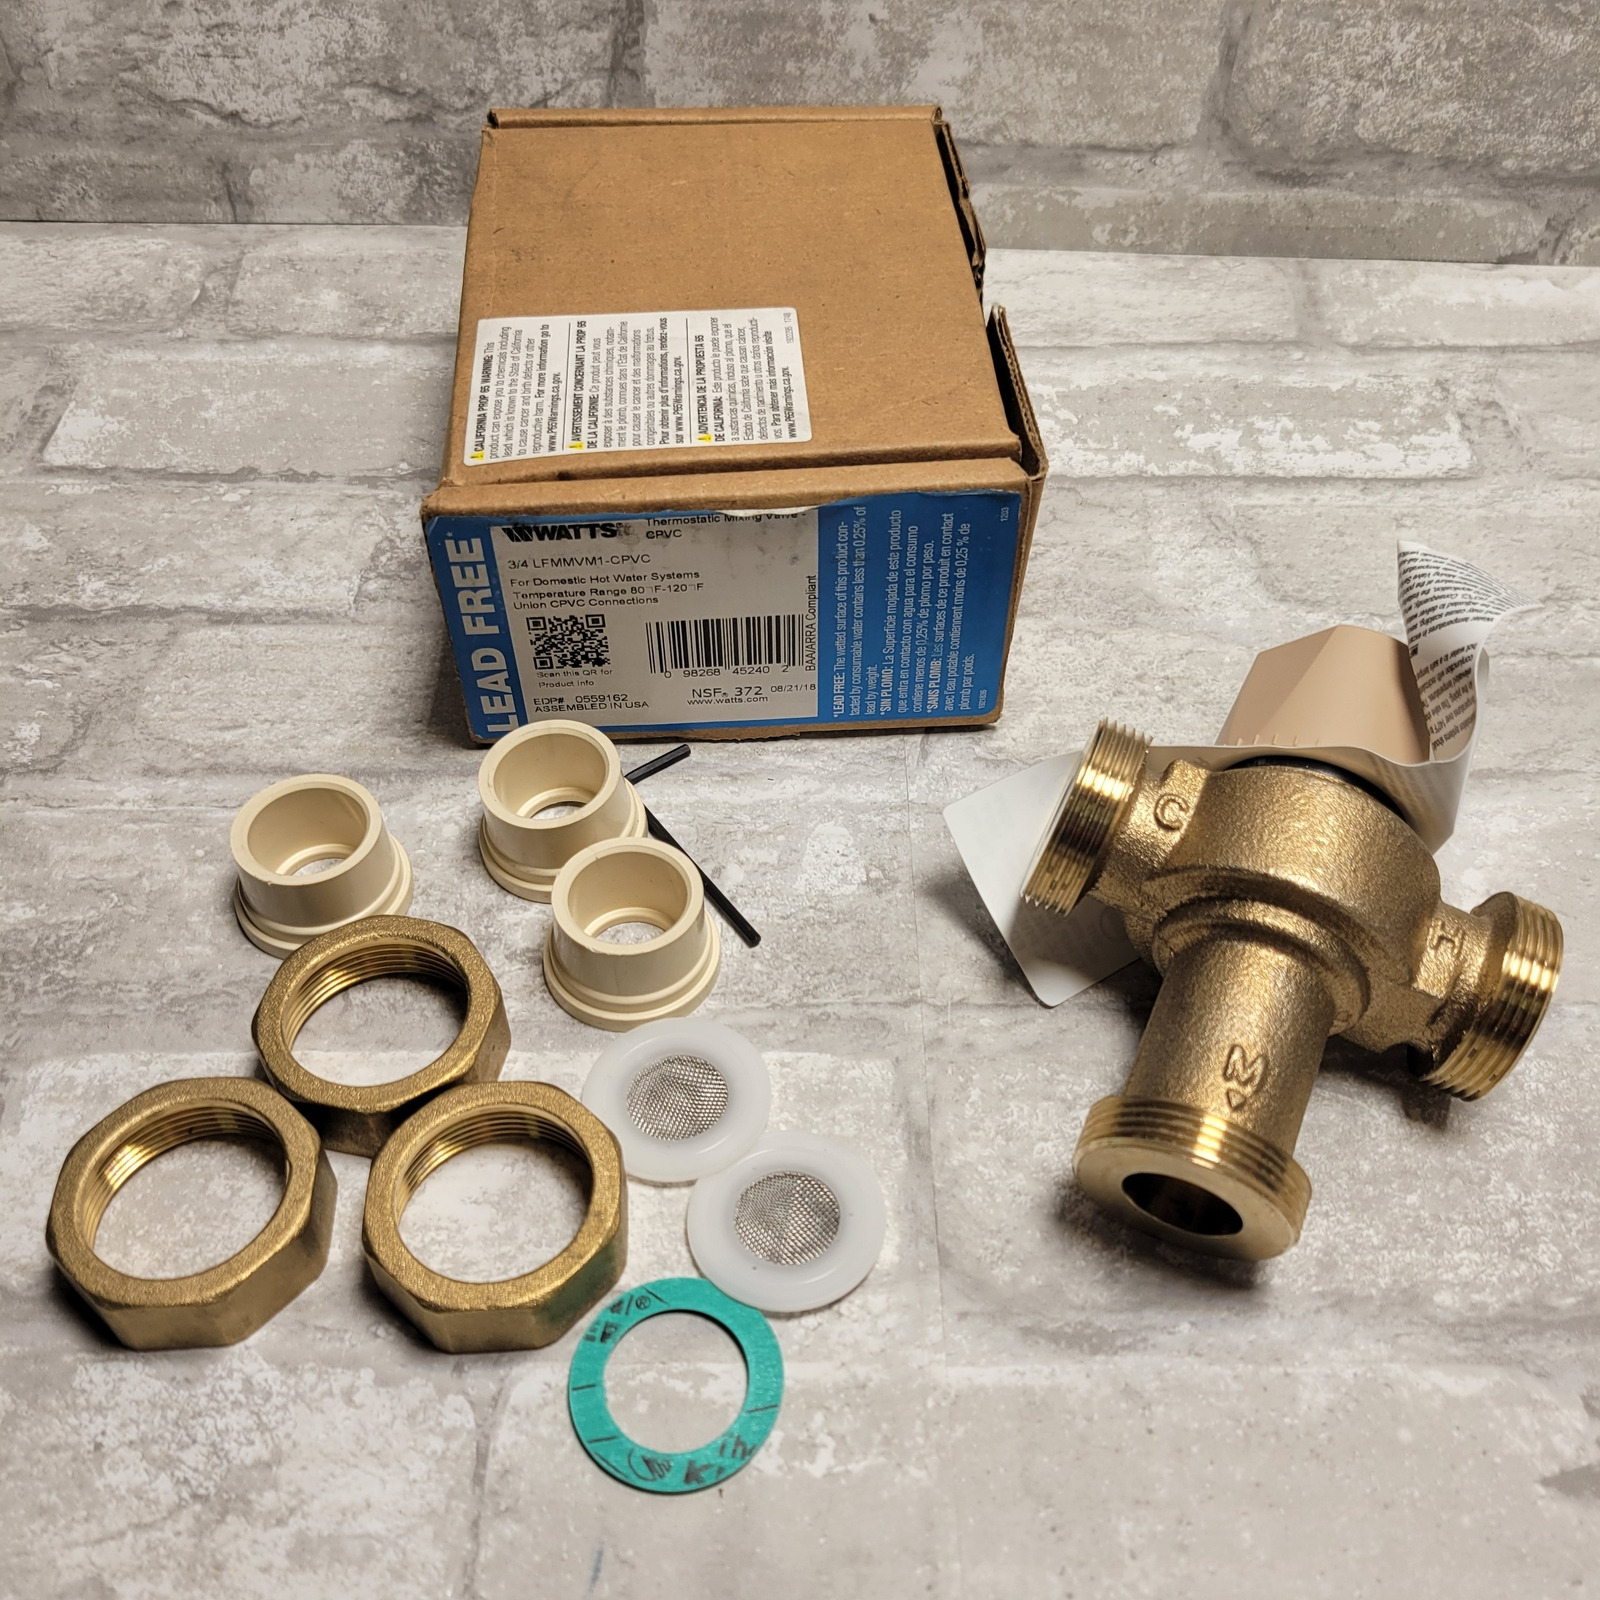 Watts LFMMVM1-CPVC, 3/4-inch Lead-Free Thermostatic Mixing Valve (EDP #0559162)